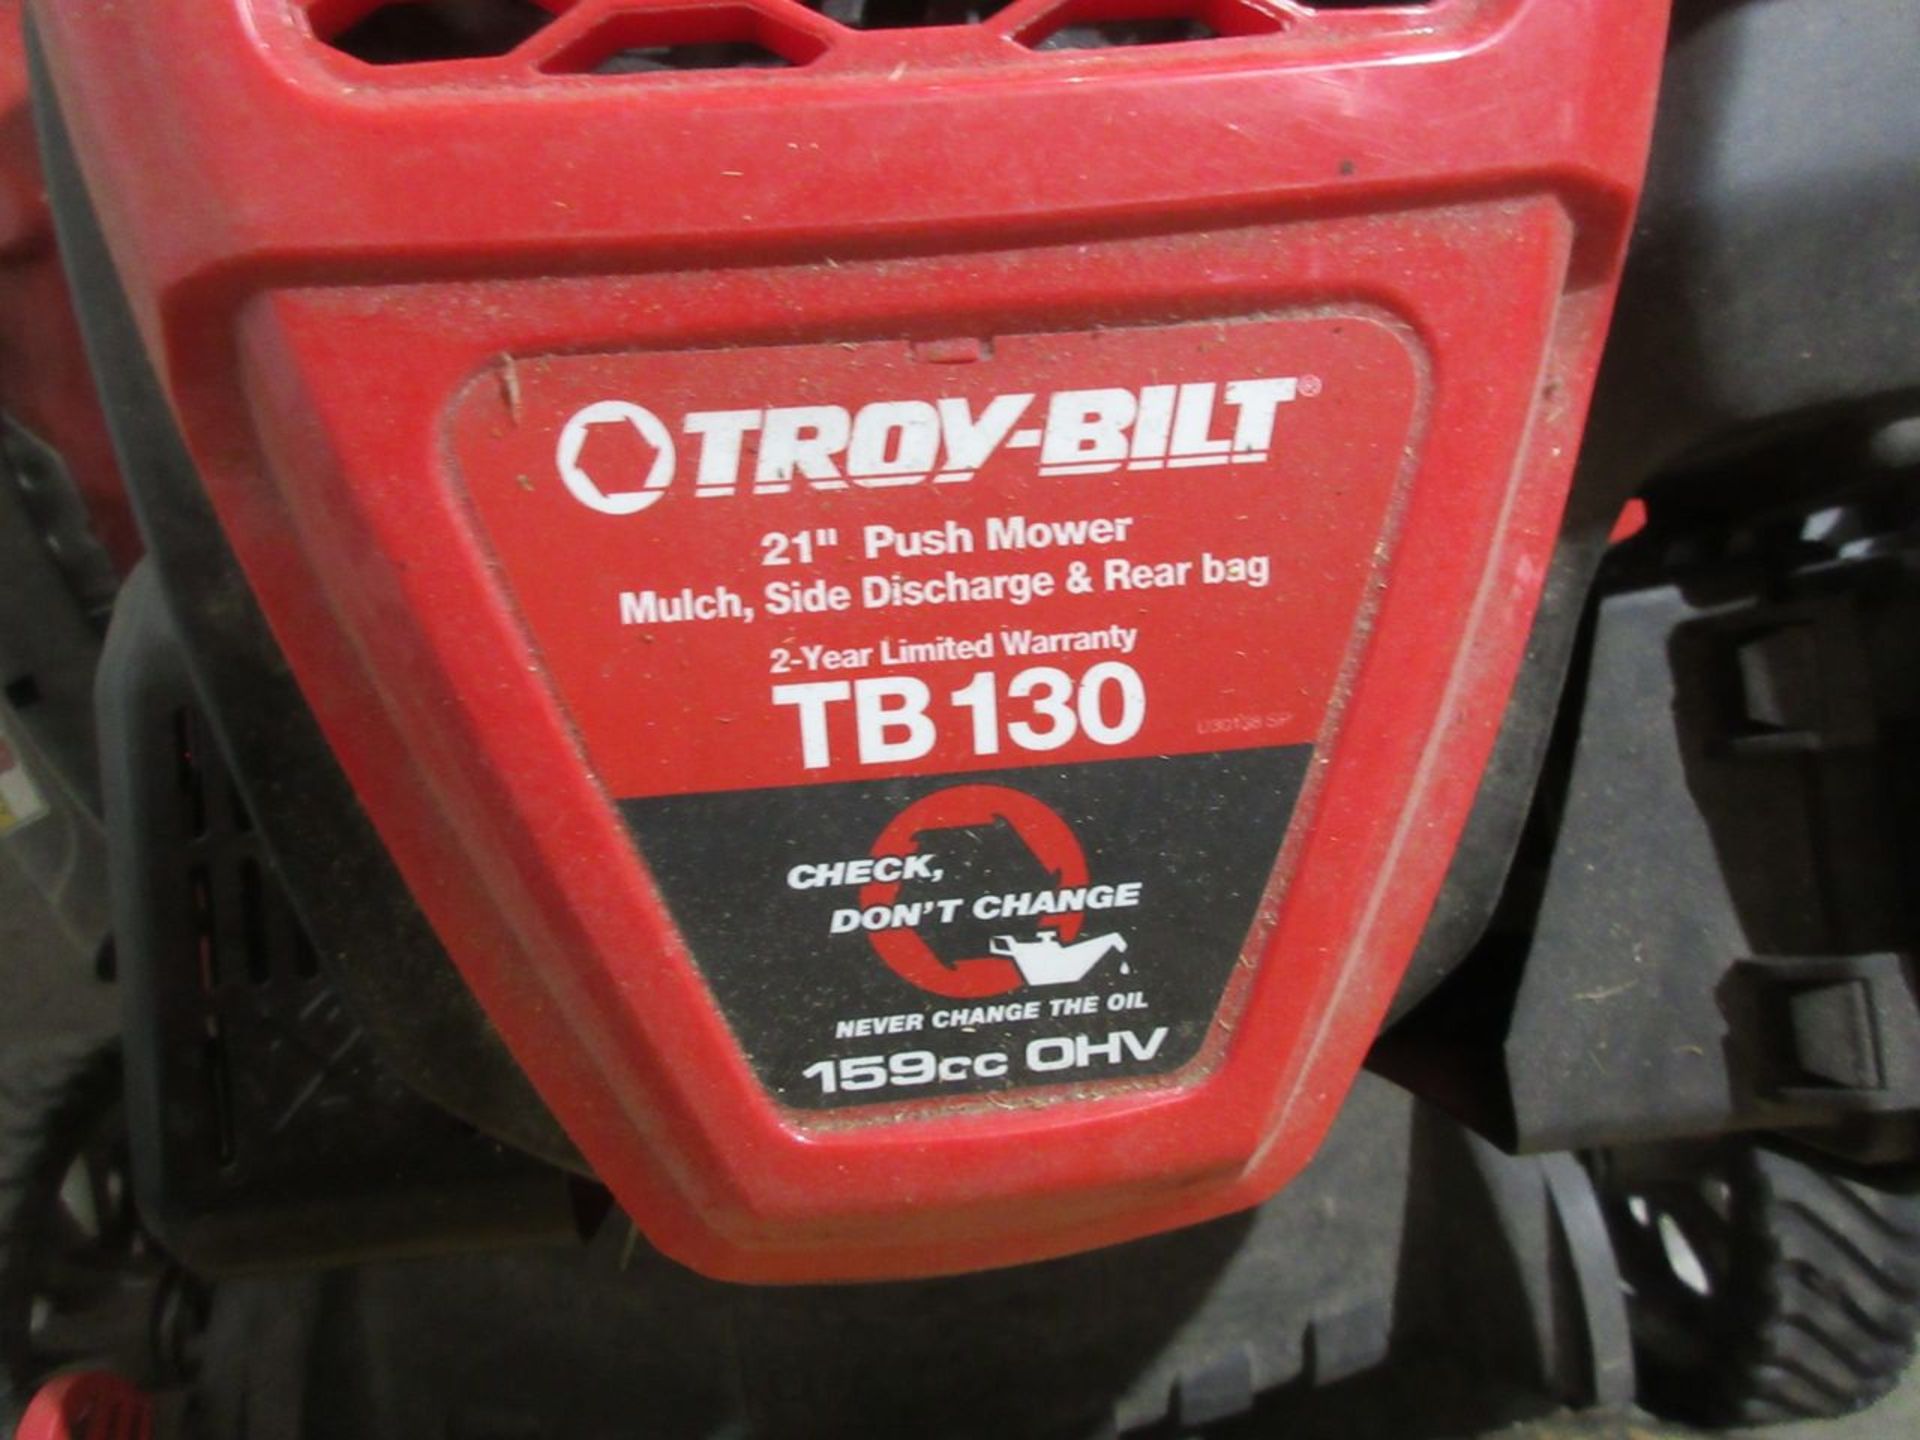 Troy-Bilt 21 in. Model TB130 Push Mower; Mulch, Side Discharge and Rear Bag - Image 3 of 3